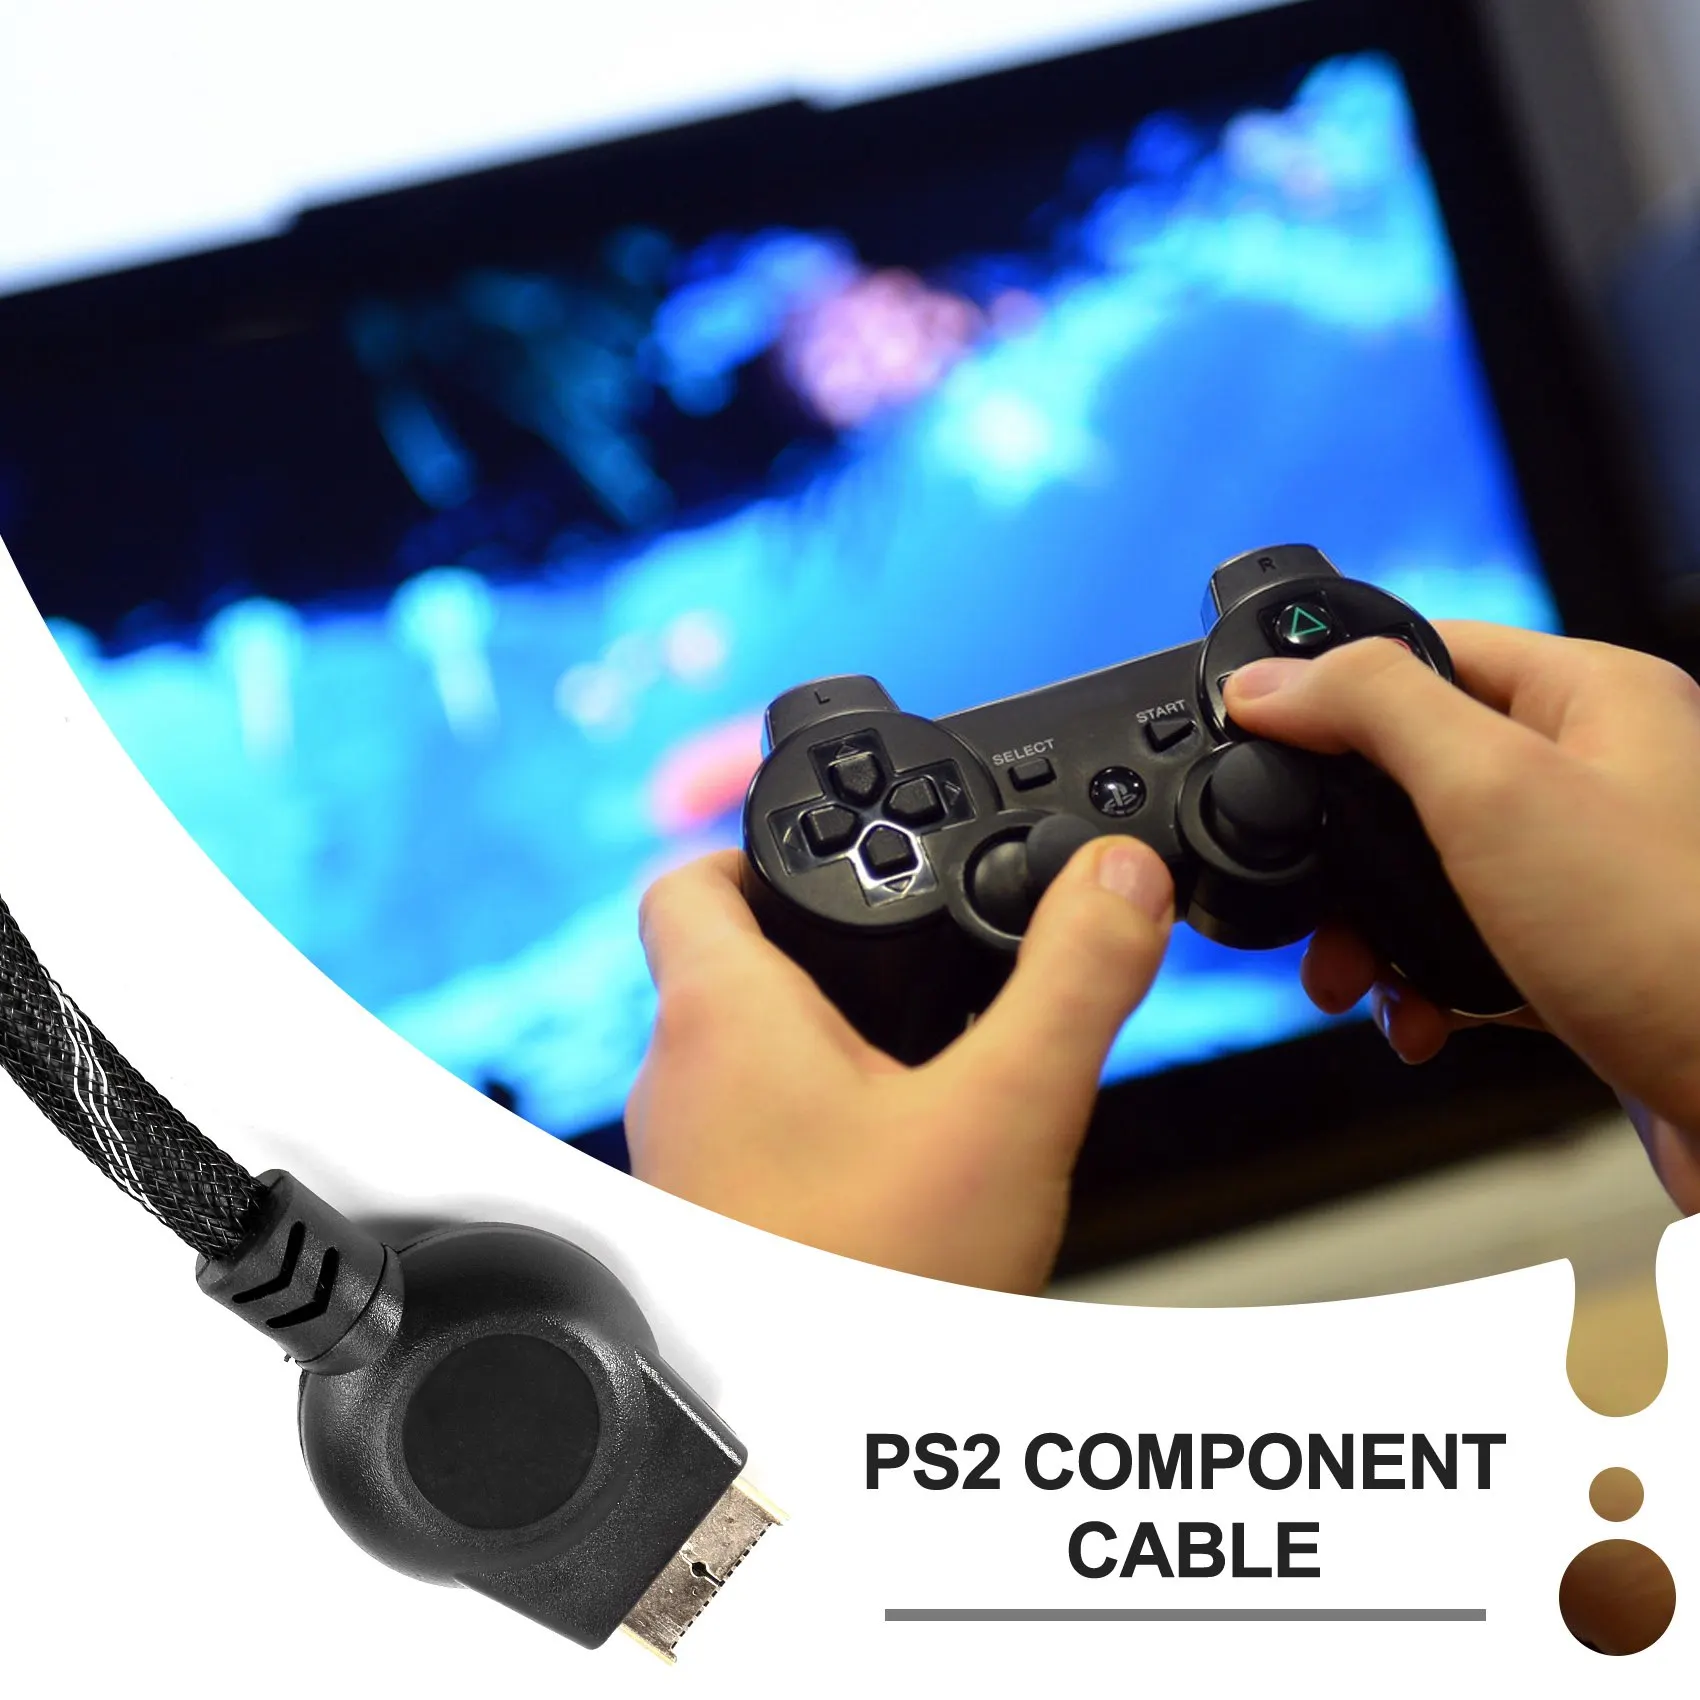 Suitable for PS2/PS3 Component Cable 1.8M Suitable for PS 2/3 High Resolution Game Cable Accessories images - 6